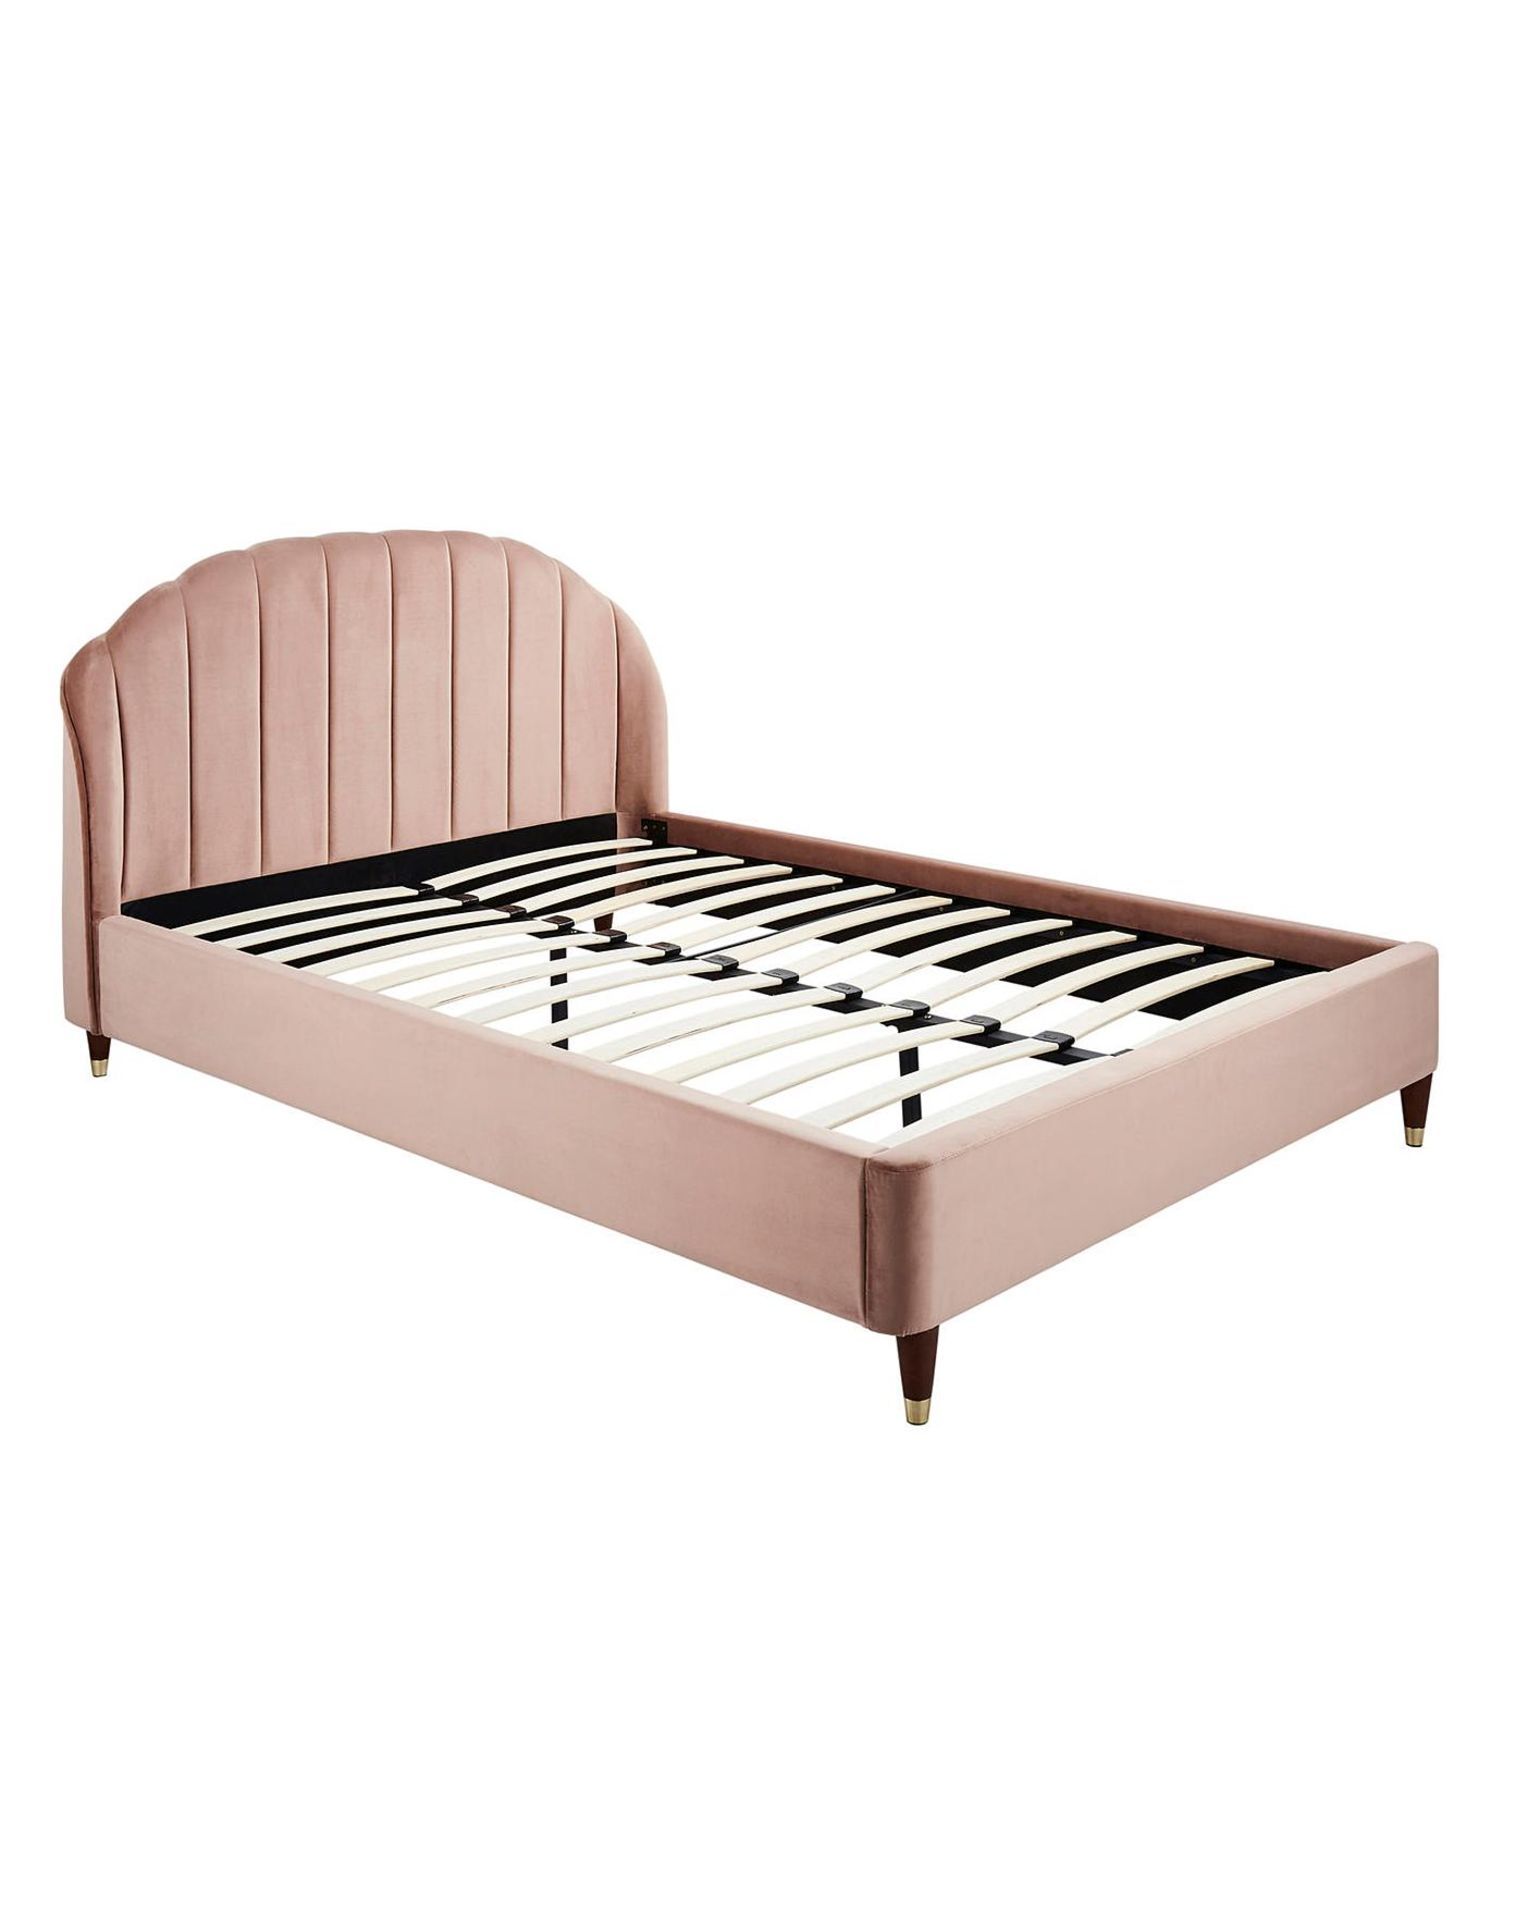 BRAND NEW CLARA Fabric KINGSIZE Bed Frame. BLUSH. RRP £439 EACH. The Clara fabric bed frame features - Image 2 of 2